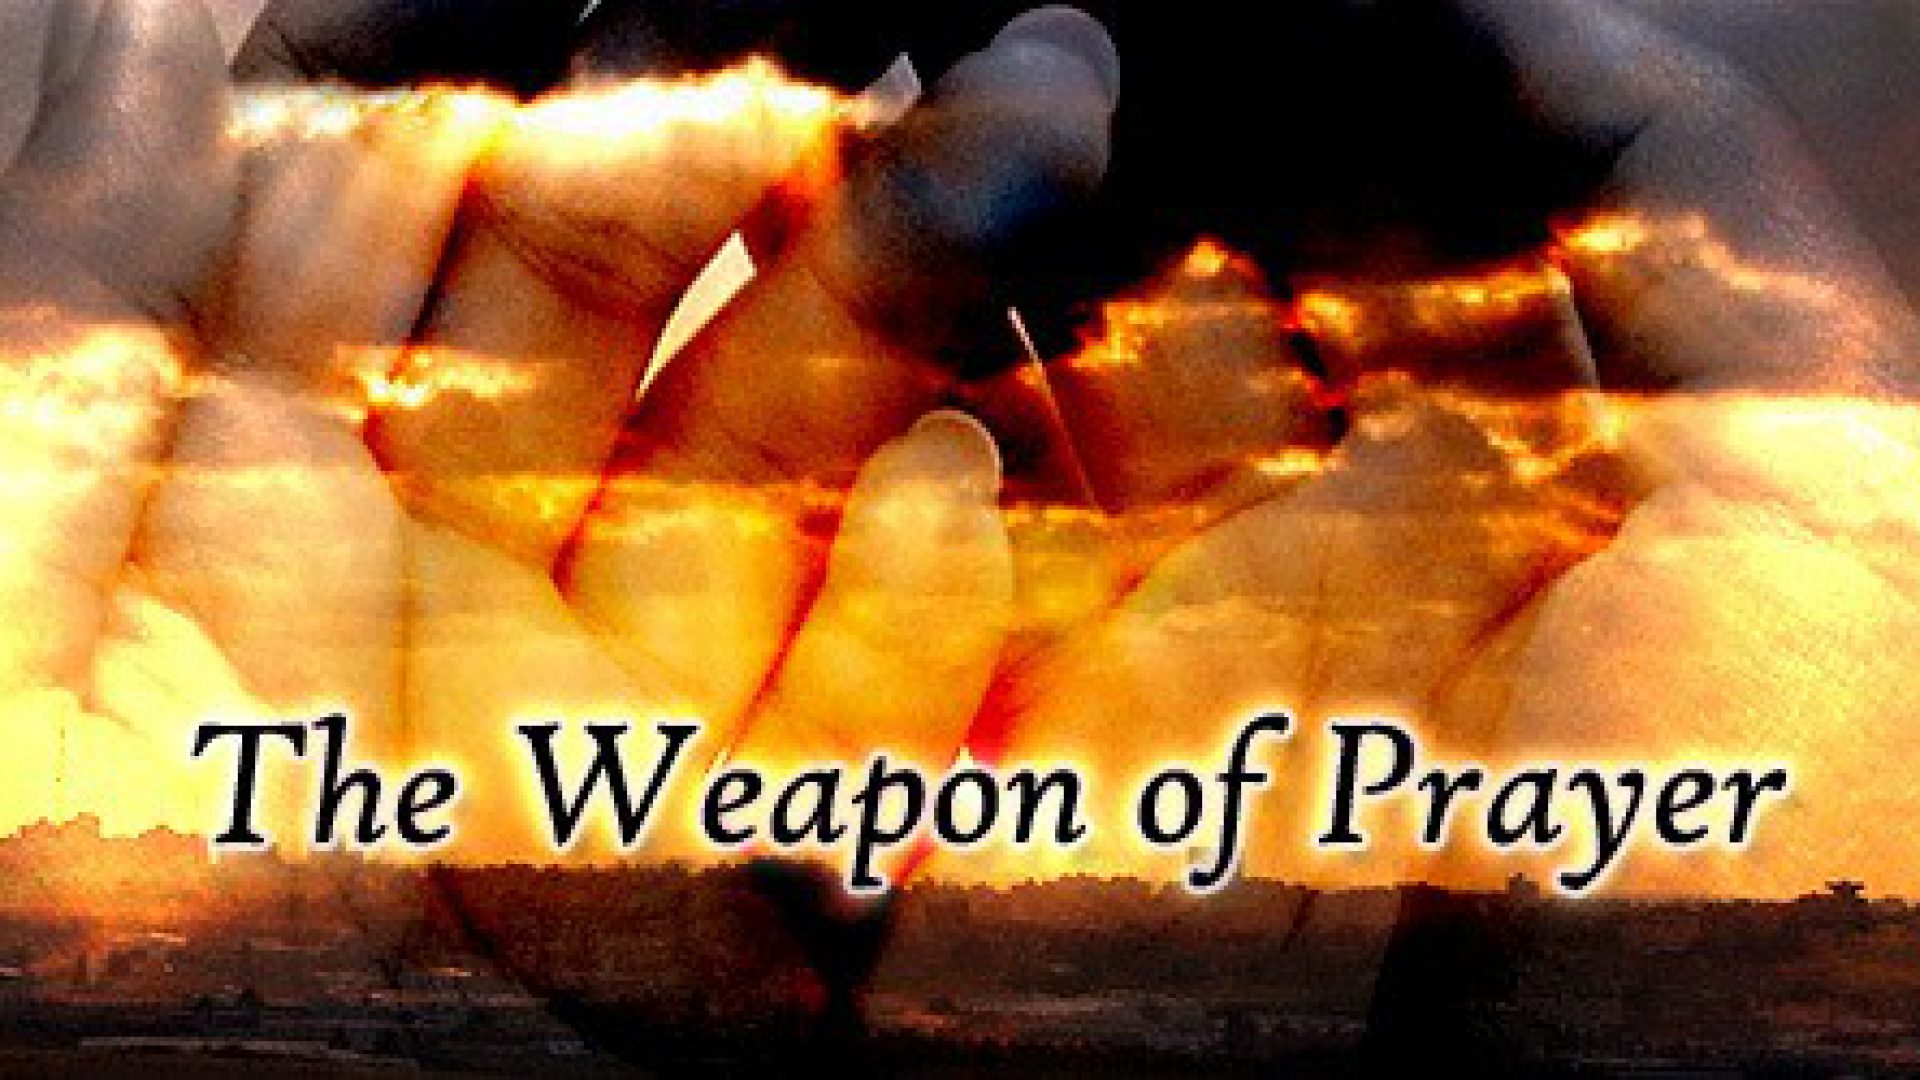 THE WEAPON OF PRAYER